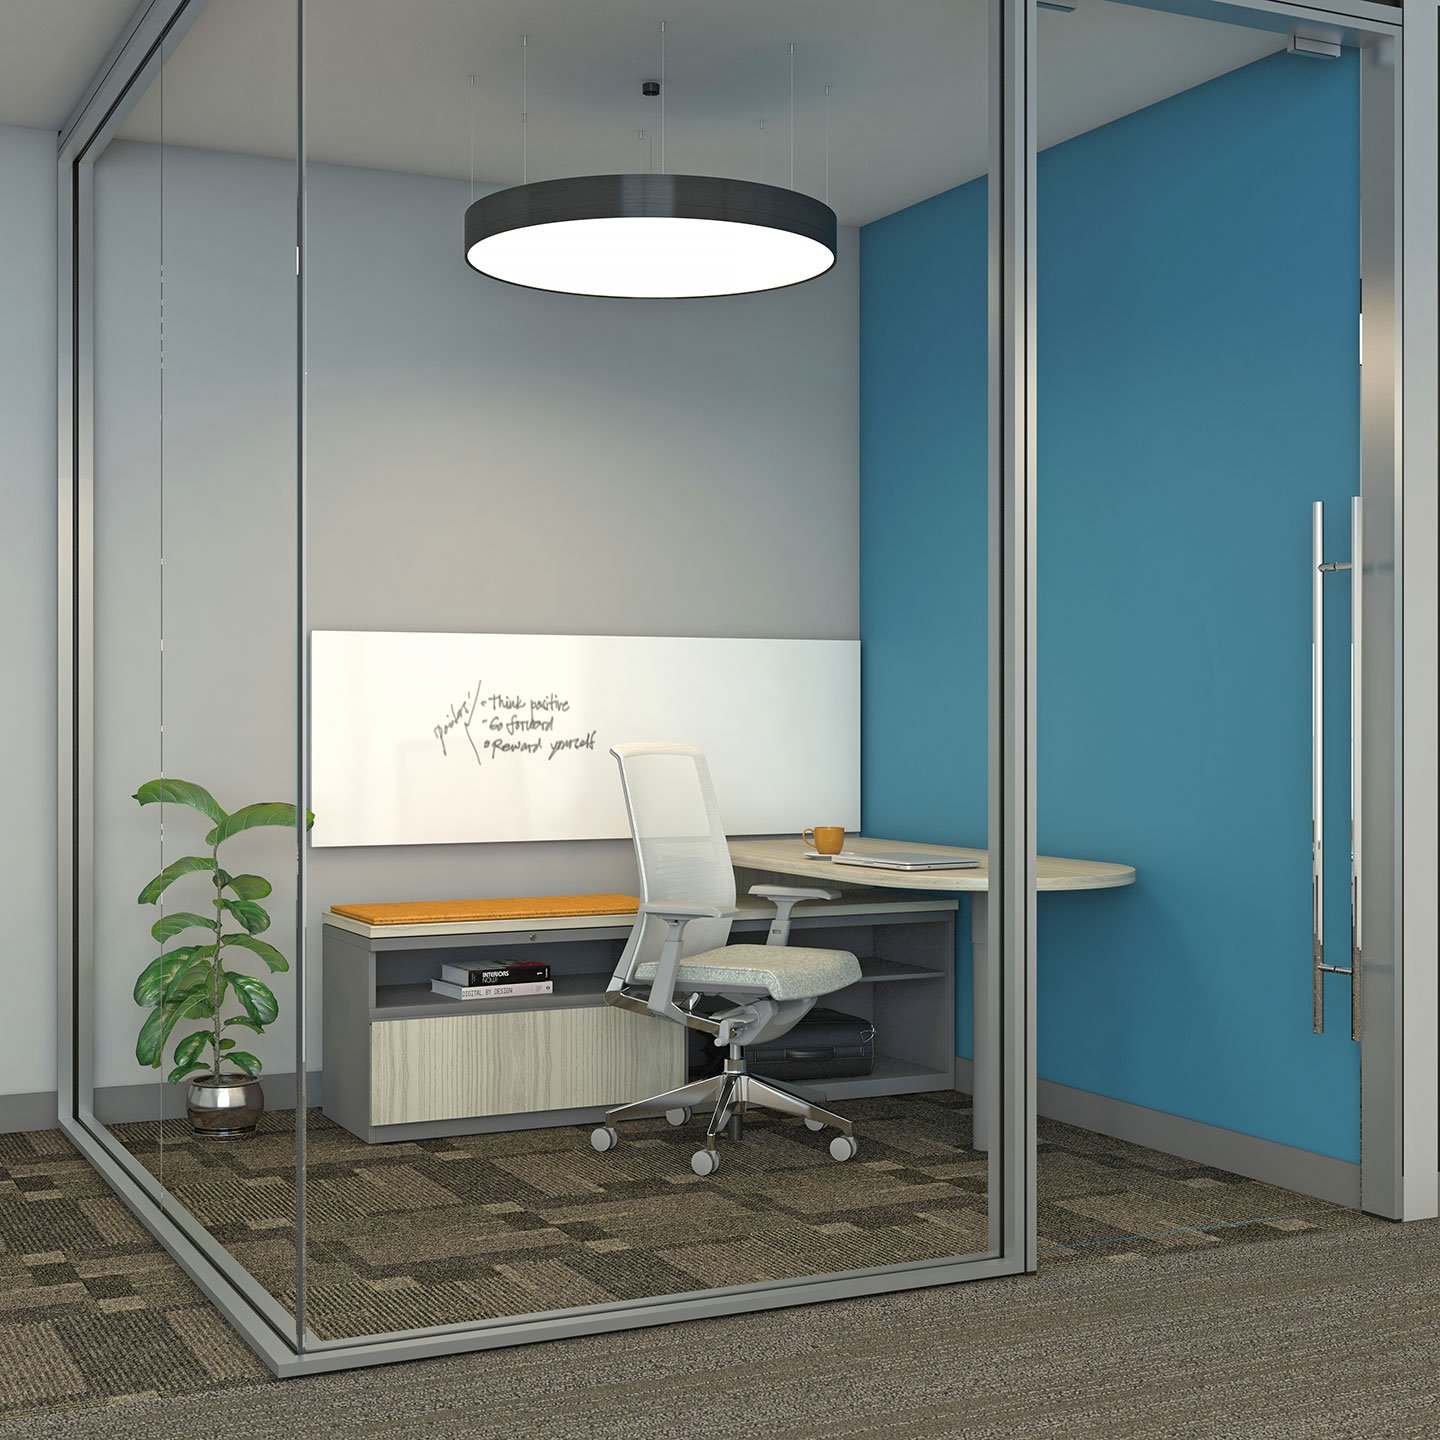 Haworth X Series Desk in white color in private office space with glass walls for privacy and white board for work